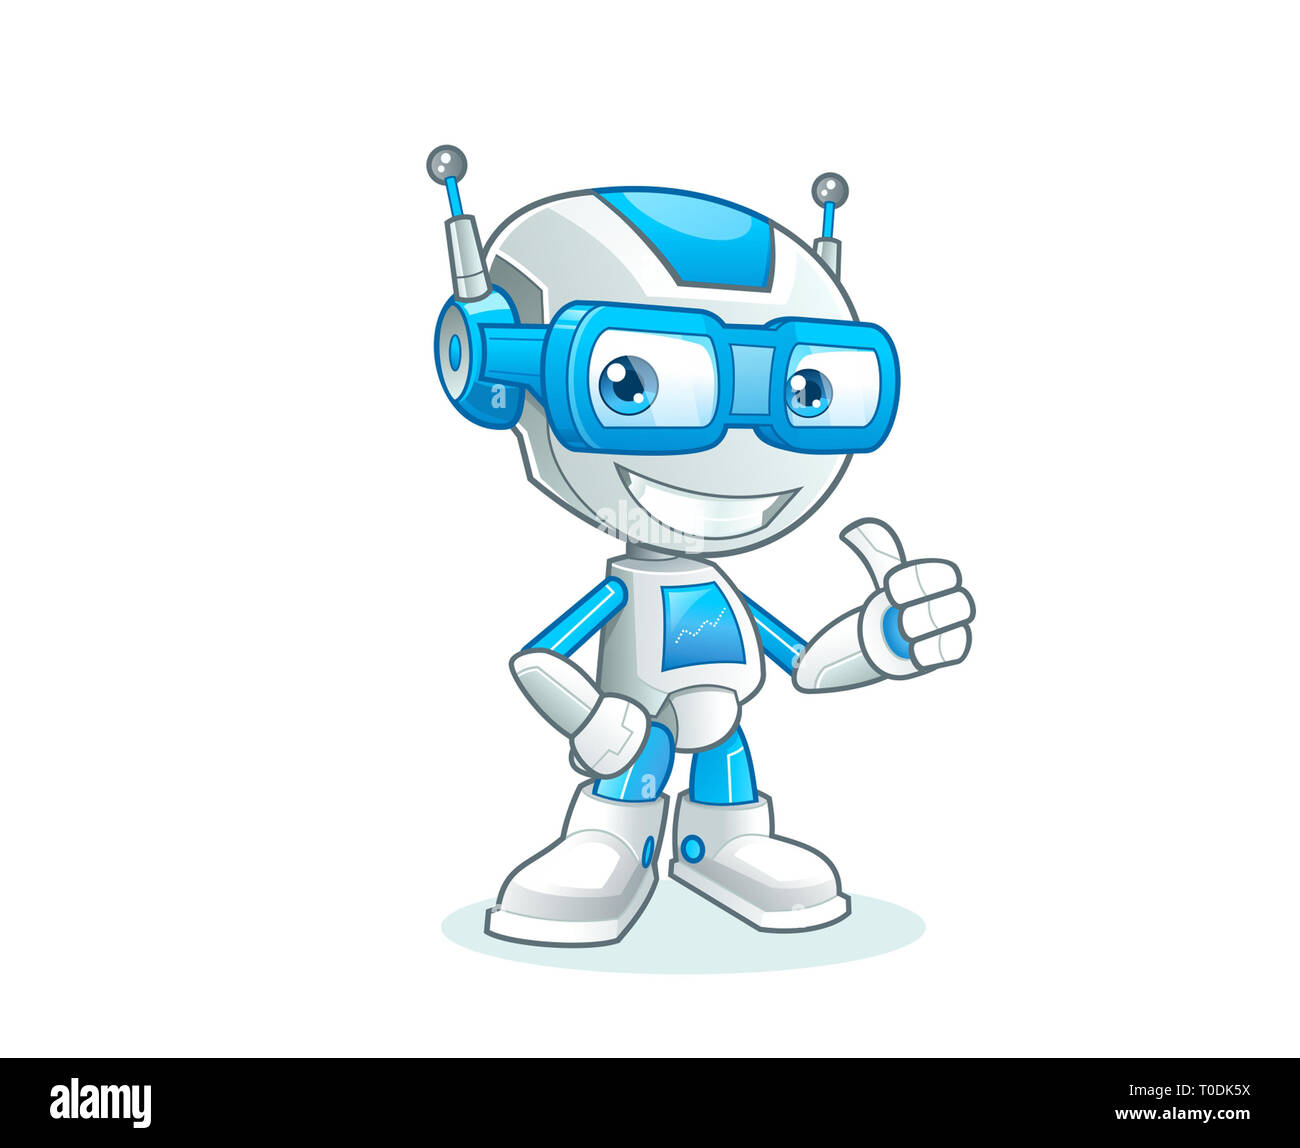 Blue Chatbot robot, character, concept Stock Photo